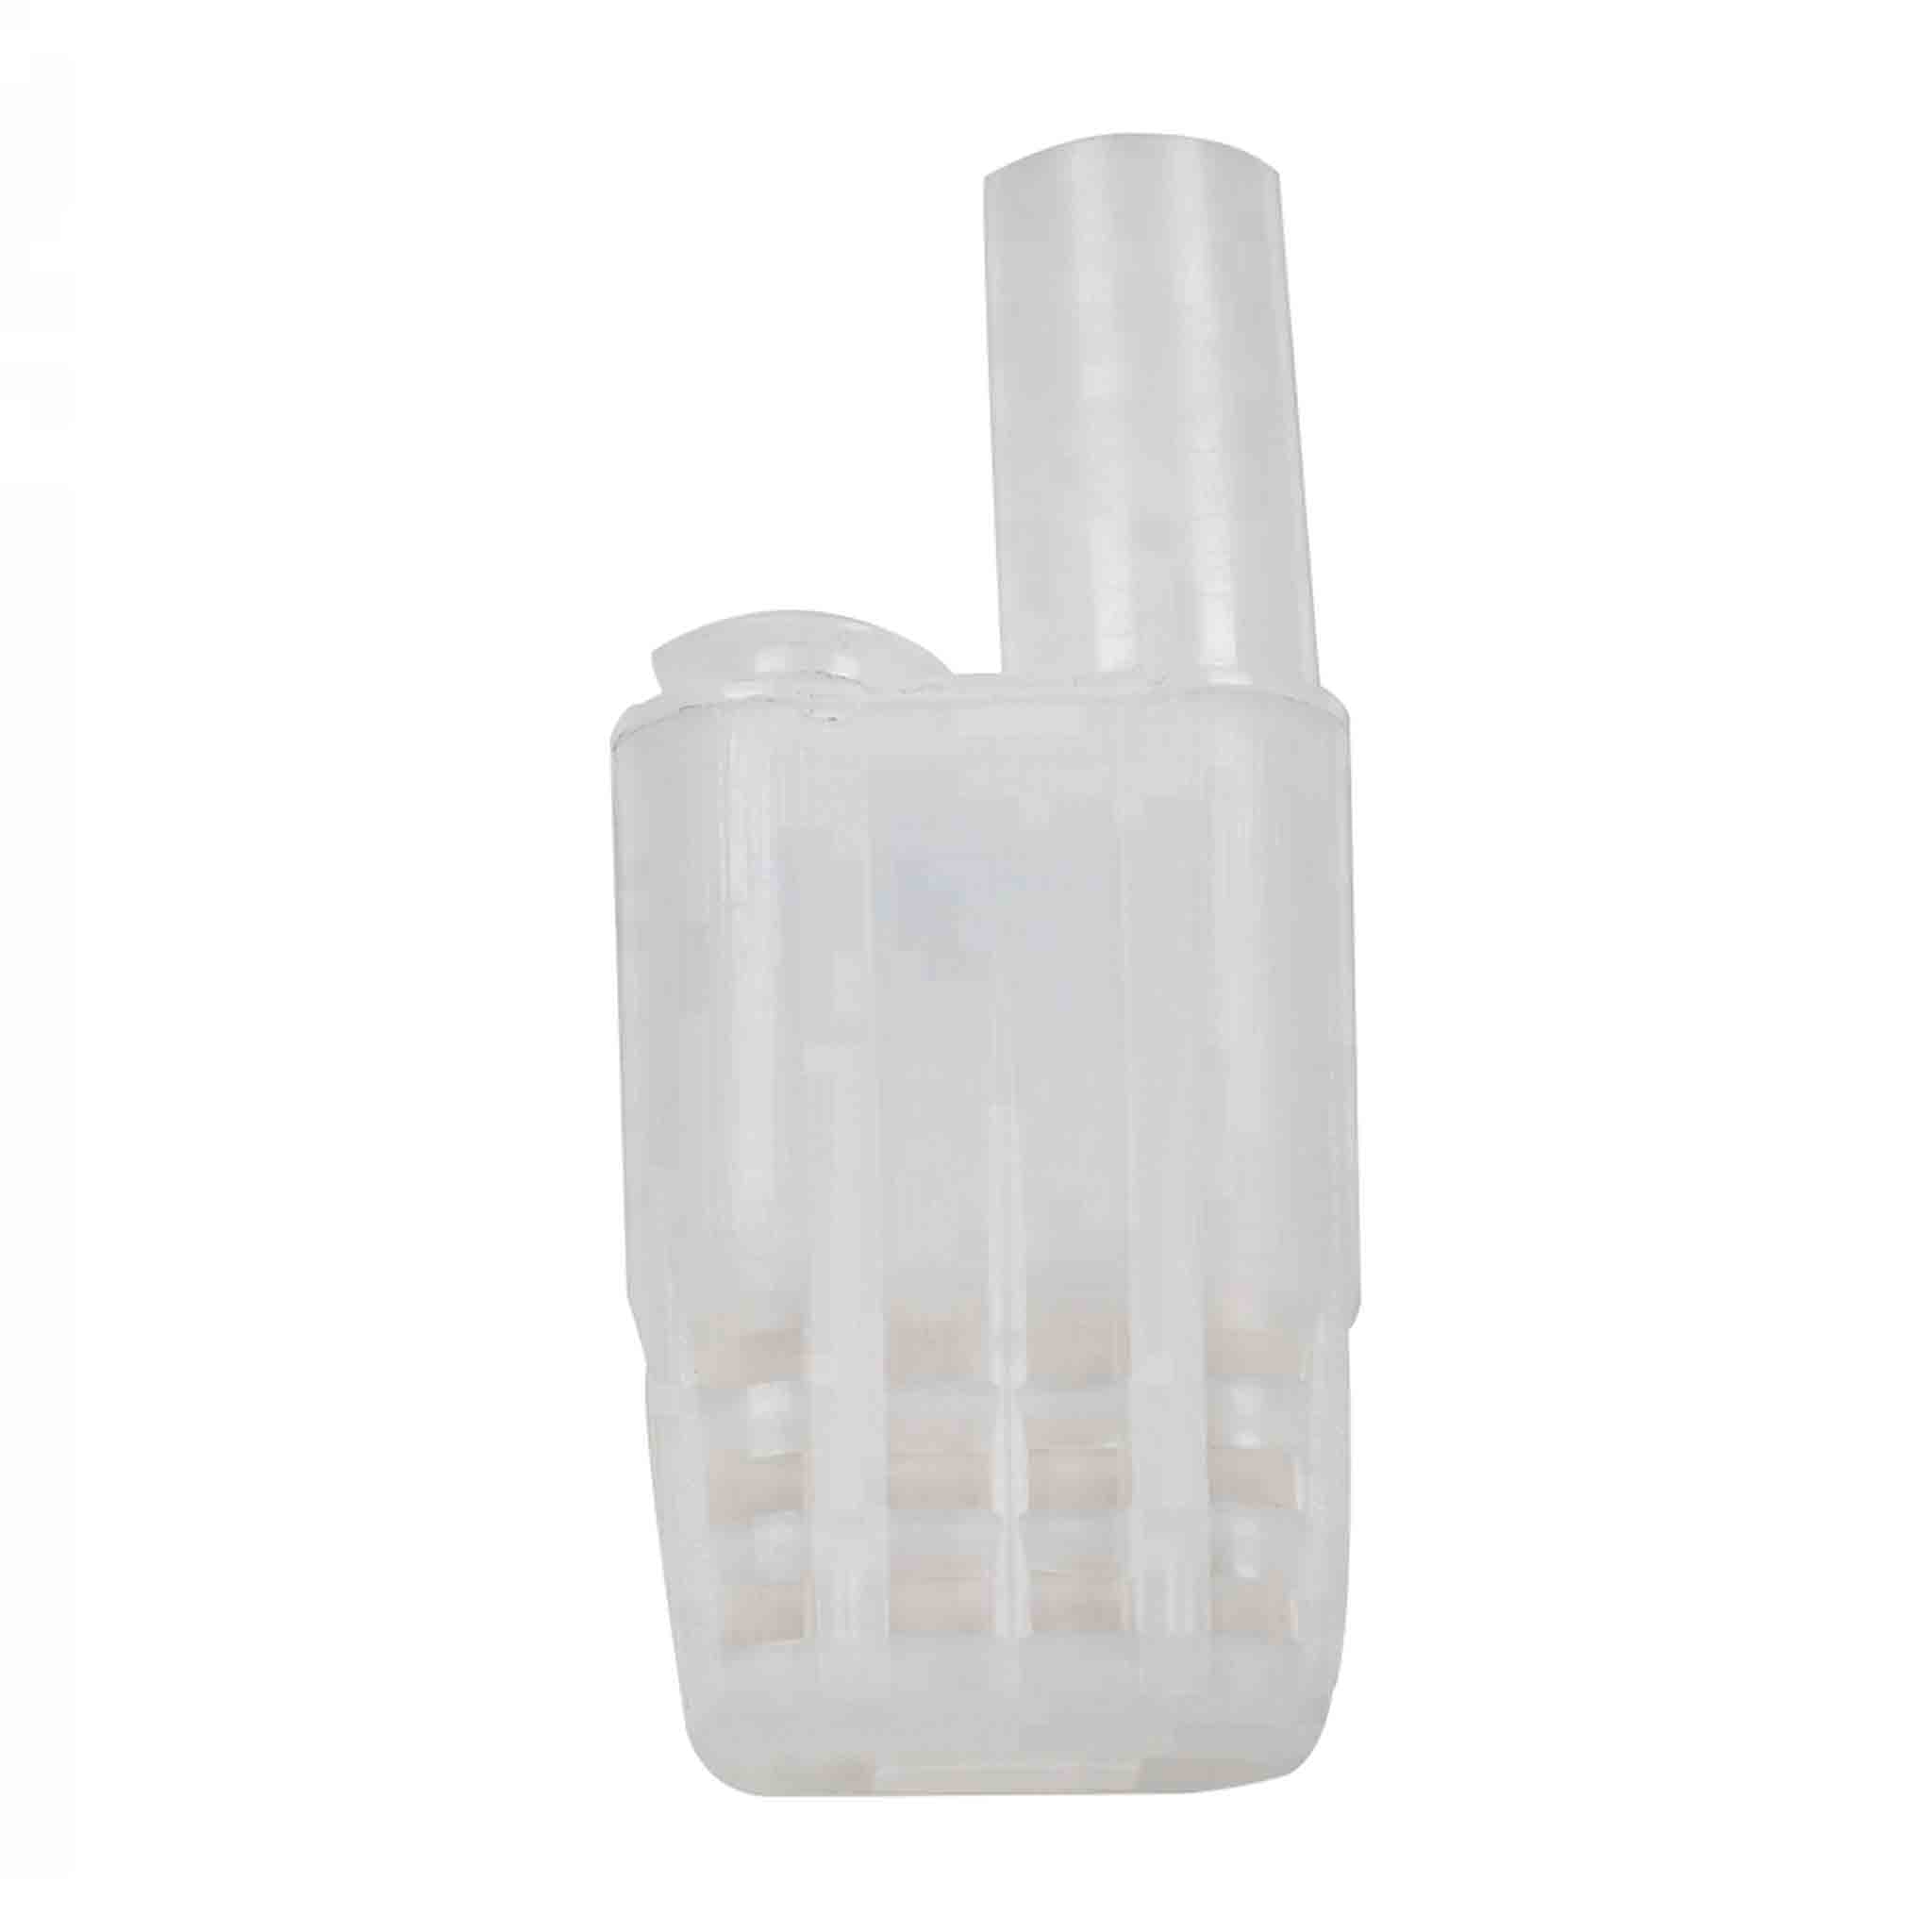 Plastic Queen Cage Large (10, 20, 40, 80 & 100 Pack available) - Queen collection by Buzzbee Beekeeping Supplies